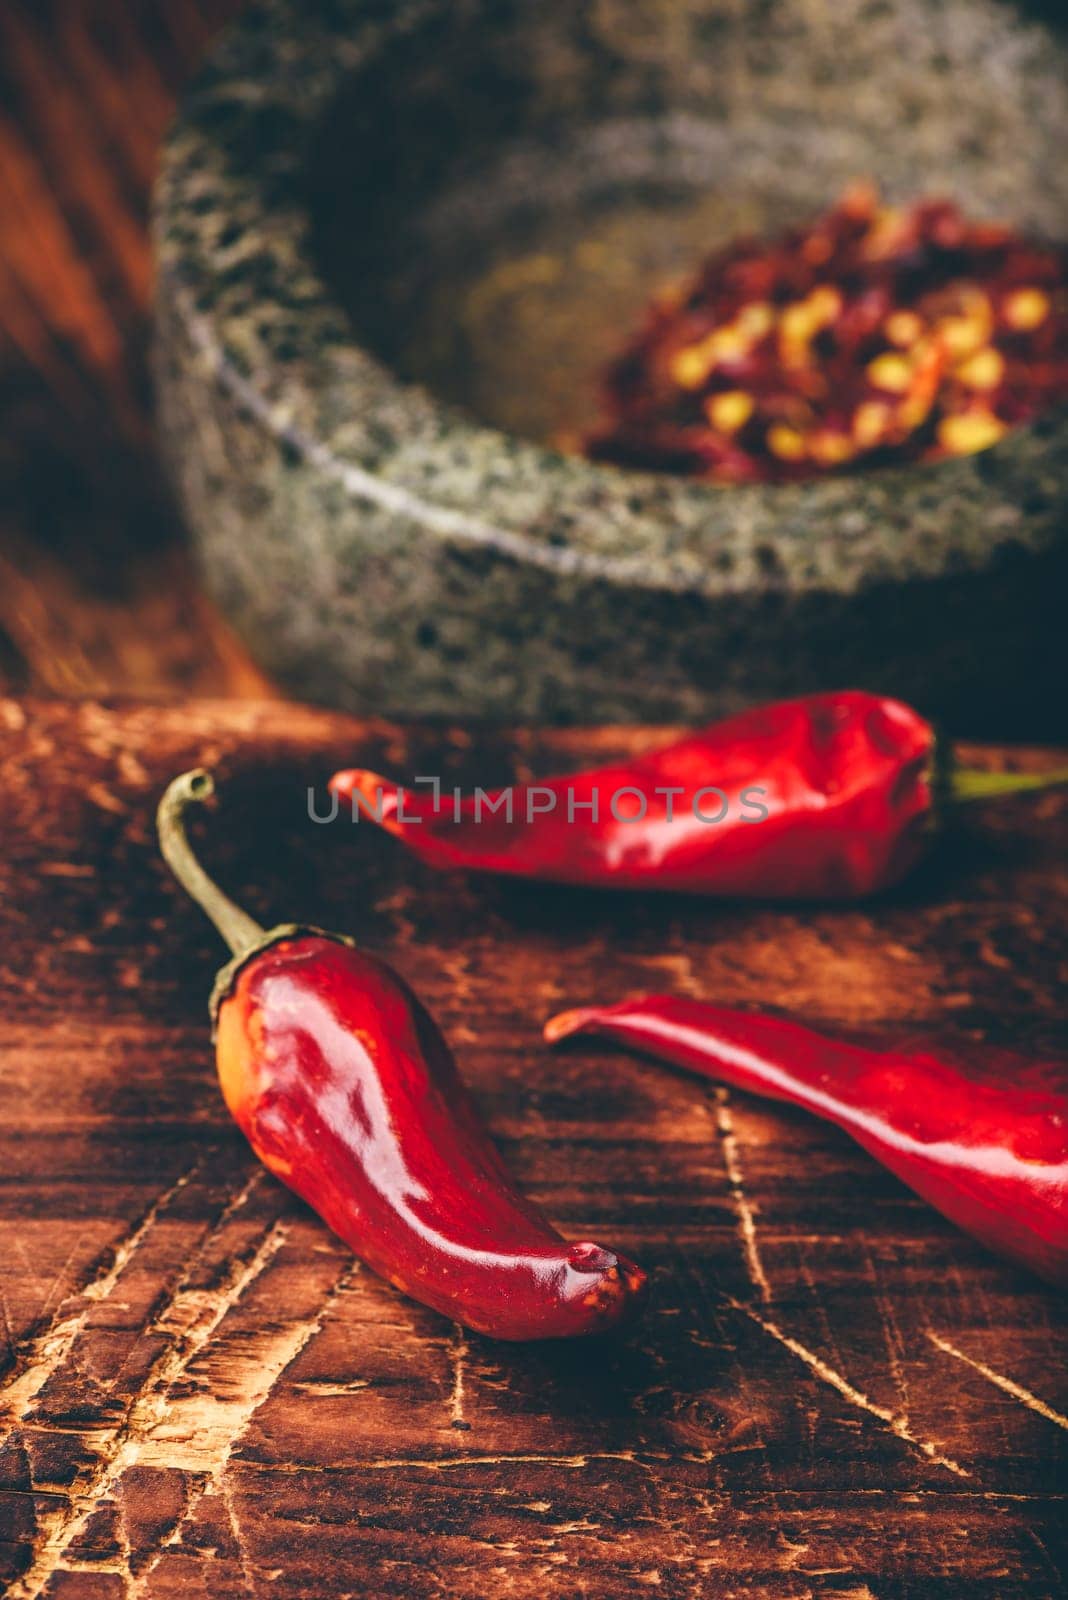 Dried red chili peppers on wooden surface with mortar and pestle by Seva_blsv